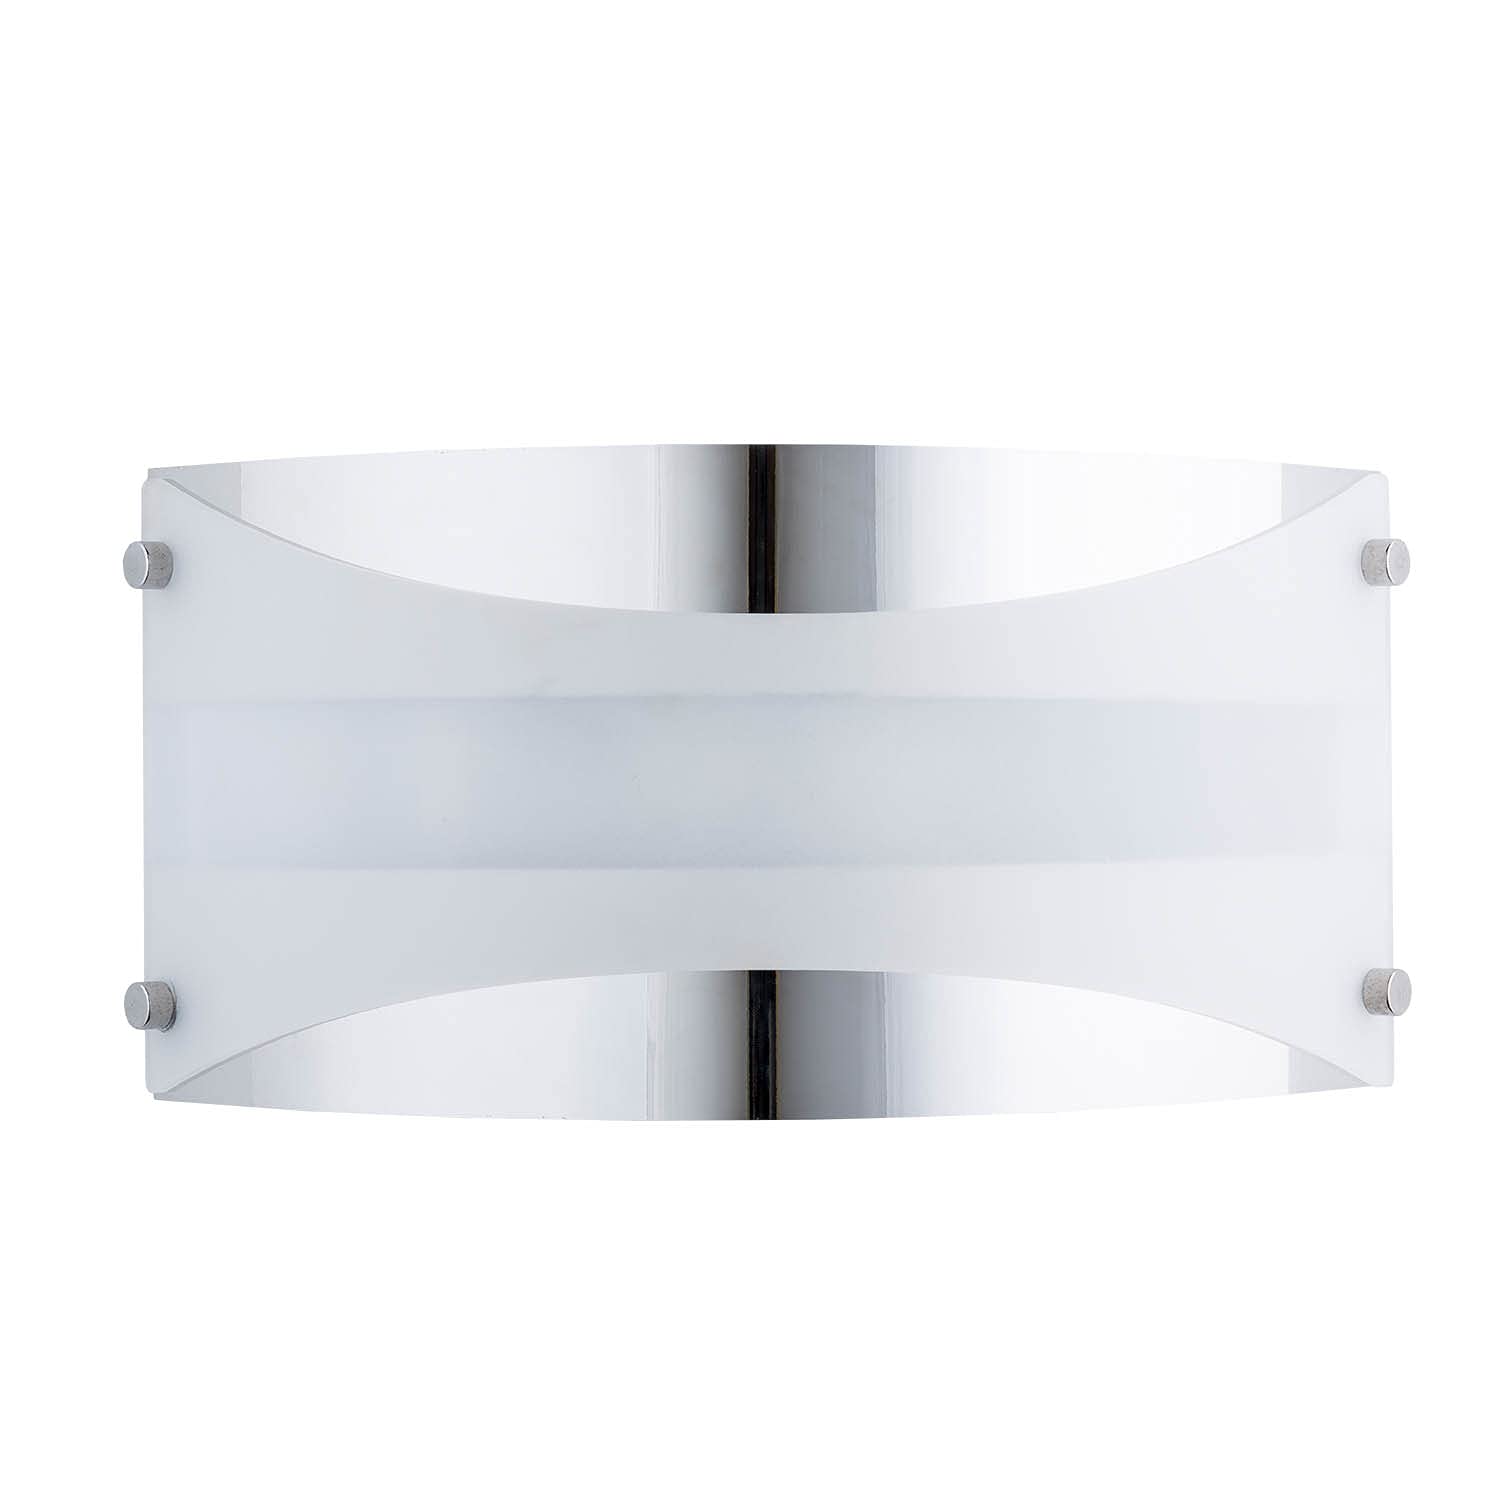 Acciaio Wall Sconce One-Light Lamp Brushed Nickel with White Diffuser - Linea di Liara LL-SC6-BN